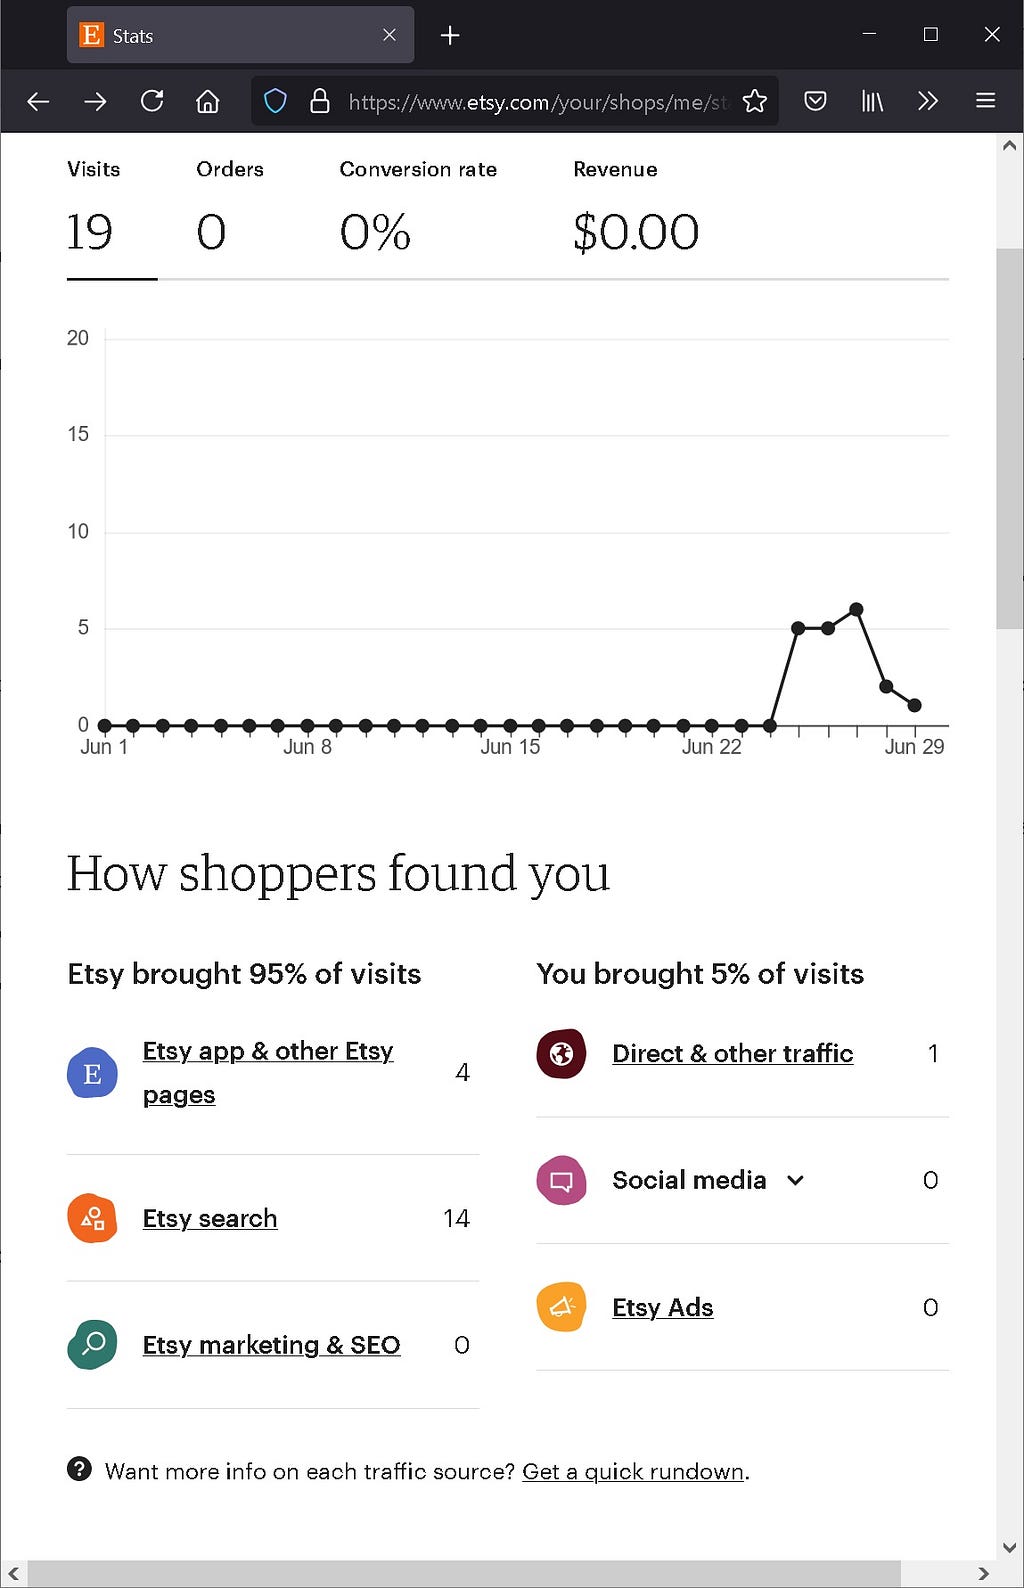 Etsy Shop Detail (How shoppers found you)